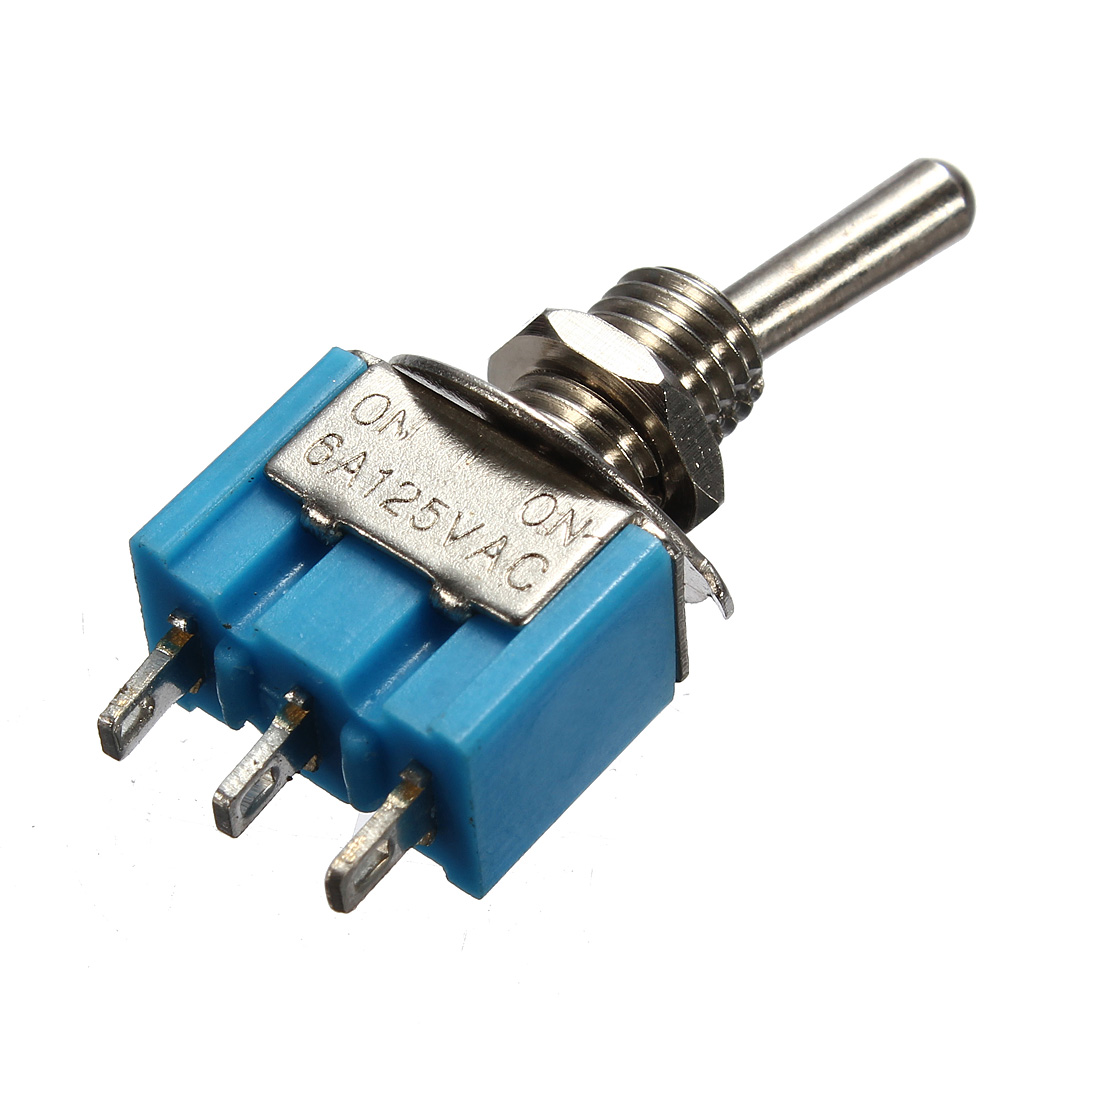 

Mini 3-Pin SPDT ON-ON 6A 125VAC B102 Miniature Toggle Switches